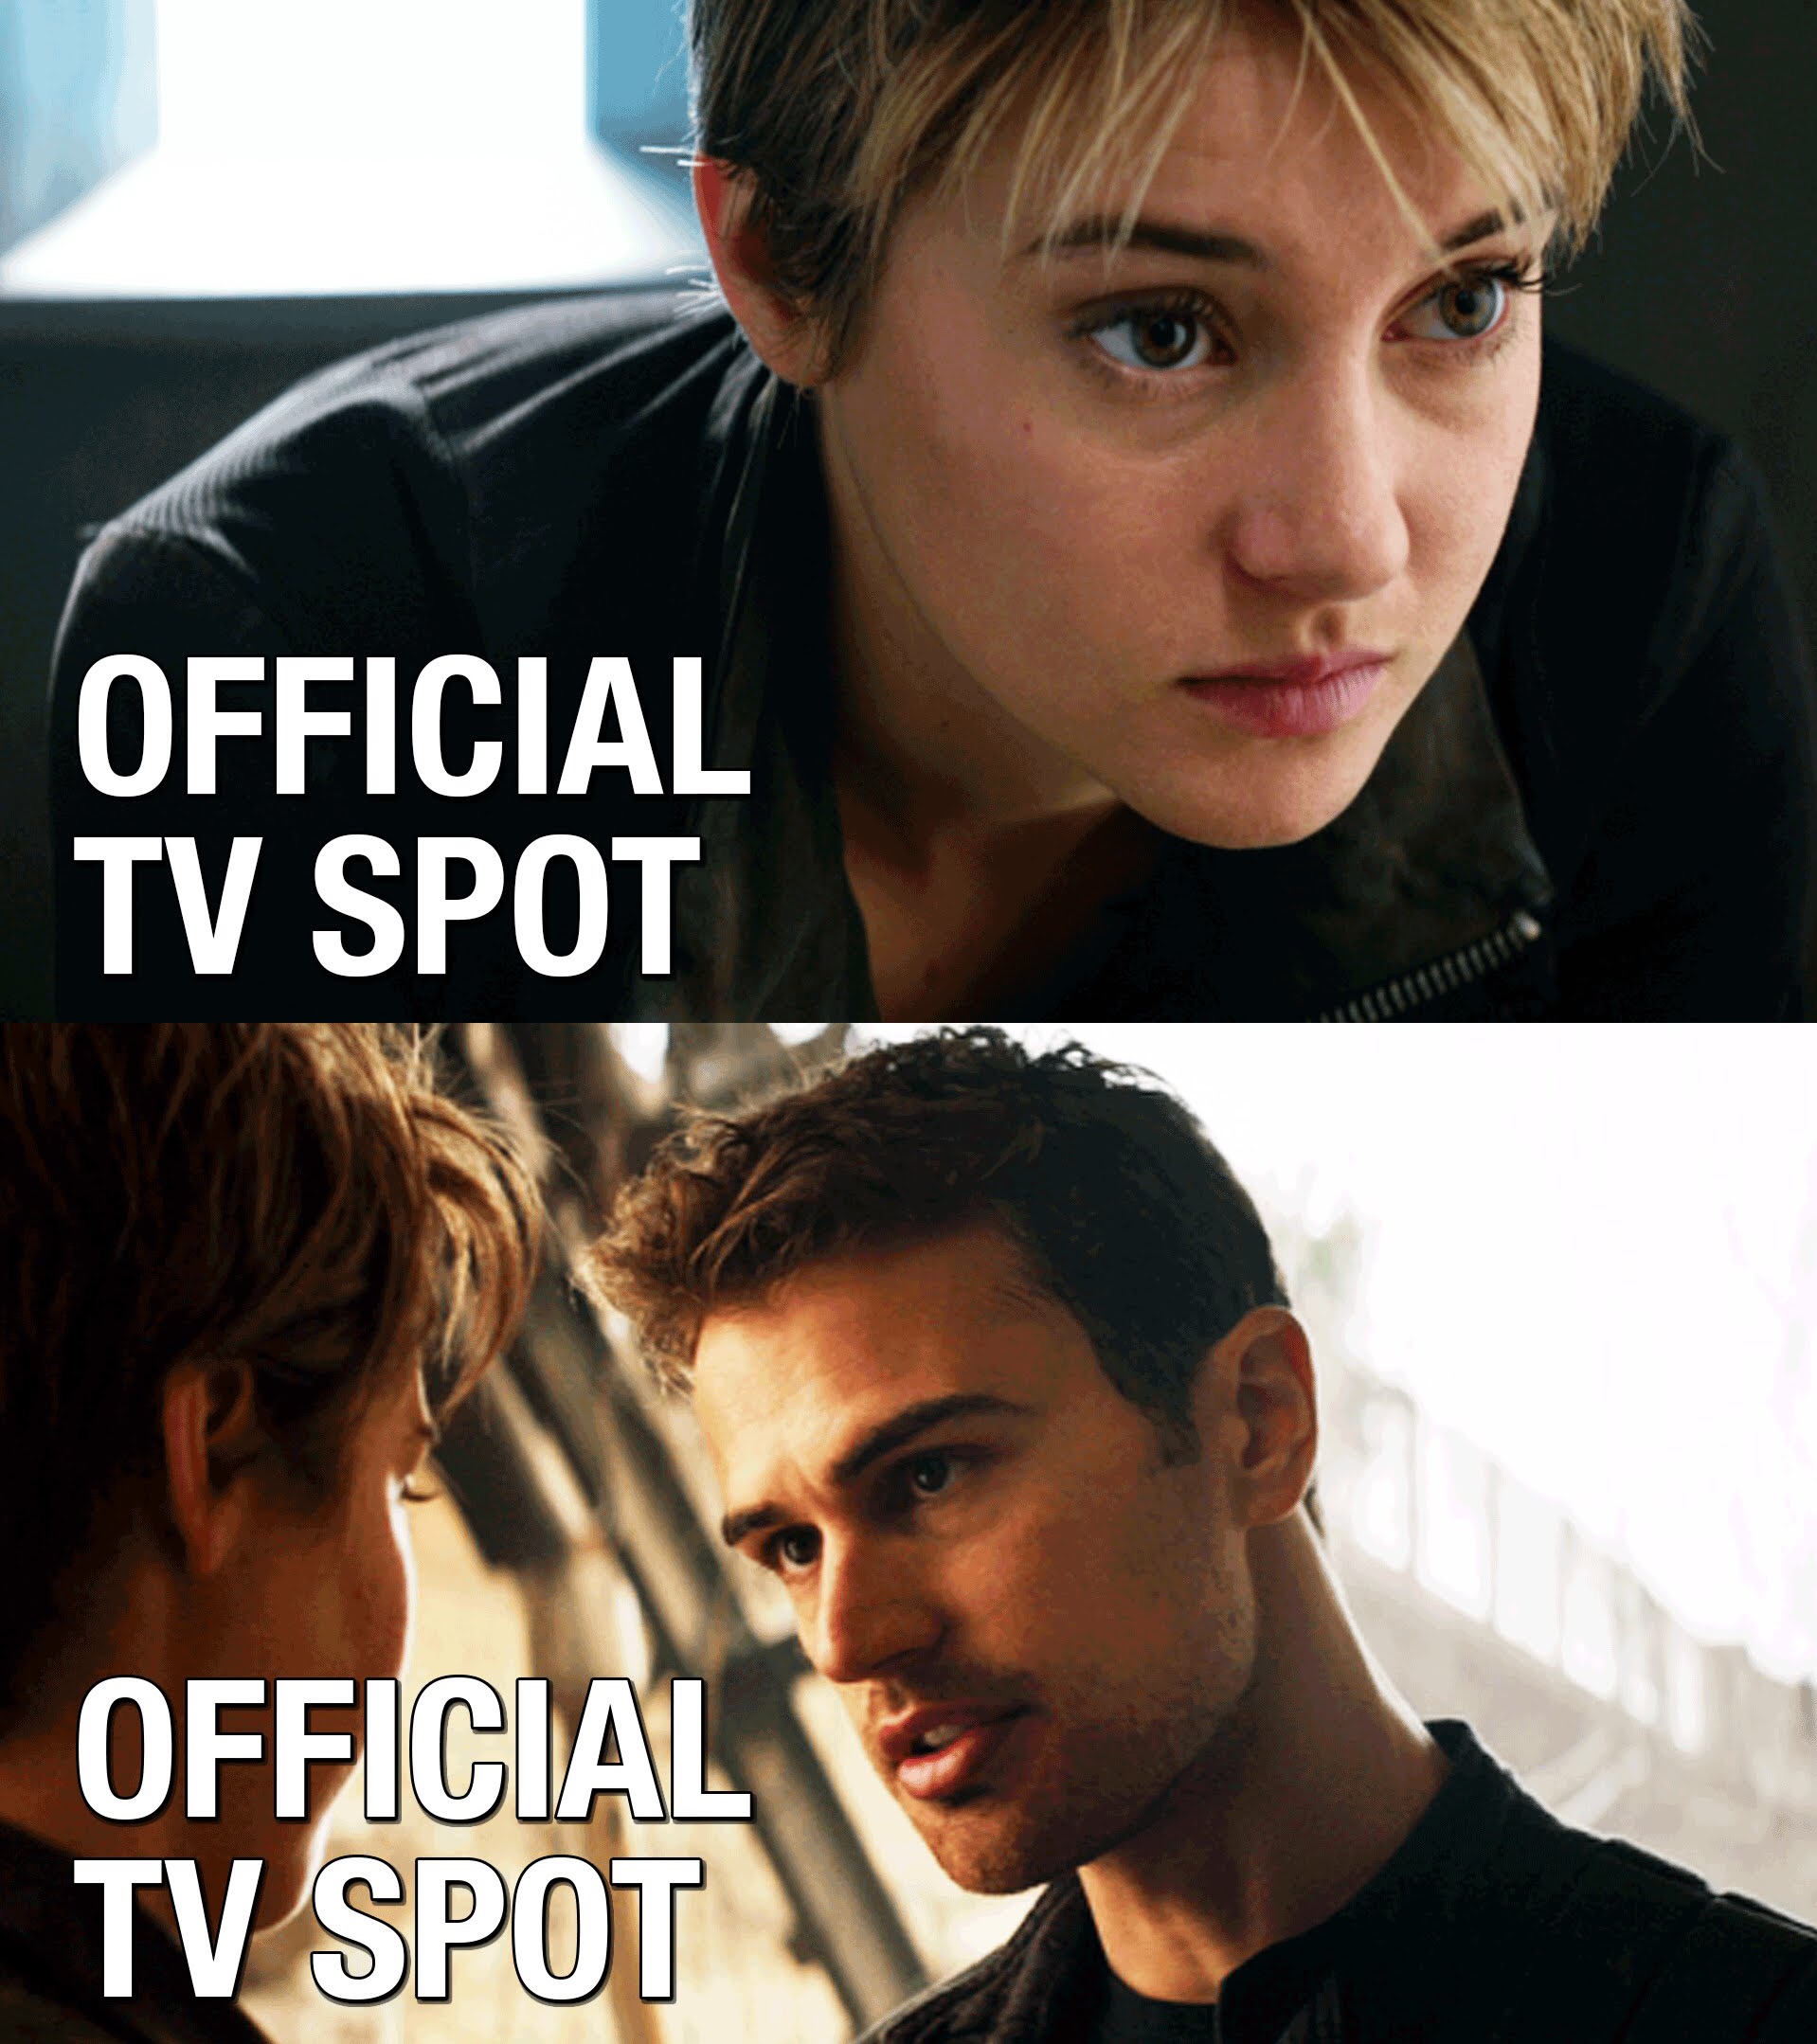 WATCH: Two New ‘Insurgent’ Spots Debut: ‘All Star Cast’ and ‘Phenomenon’